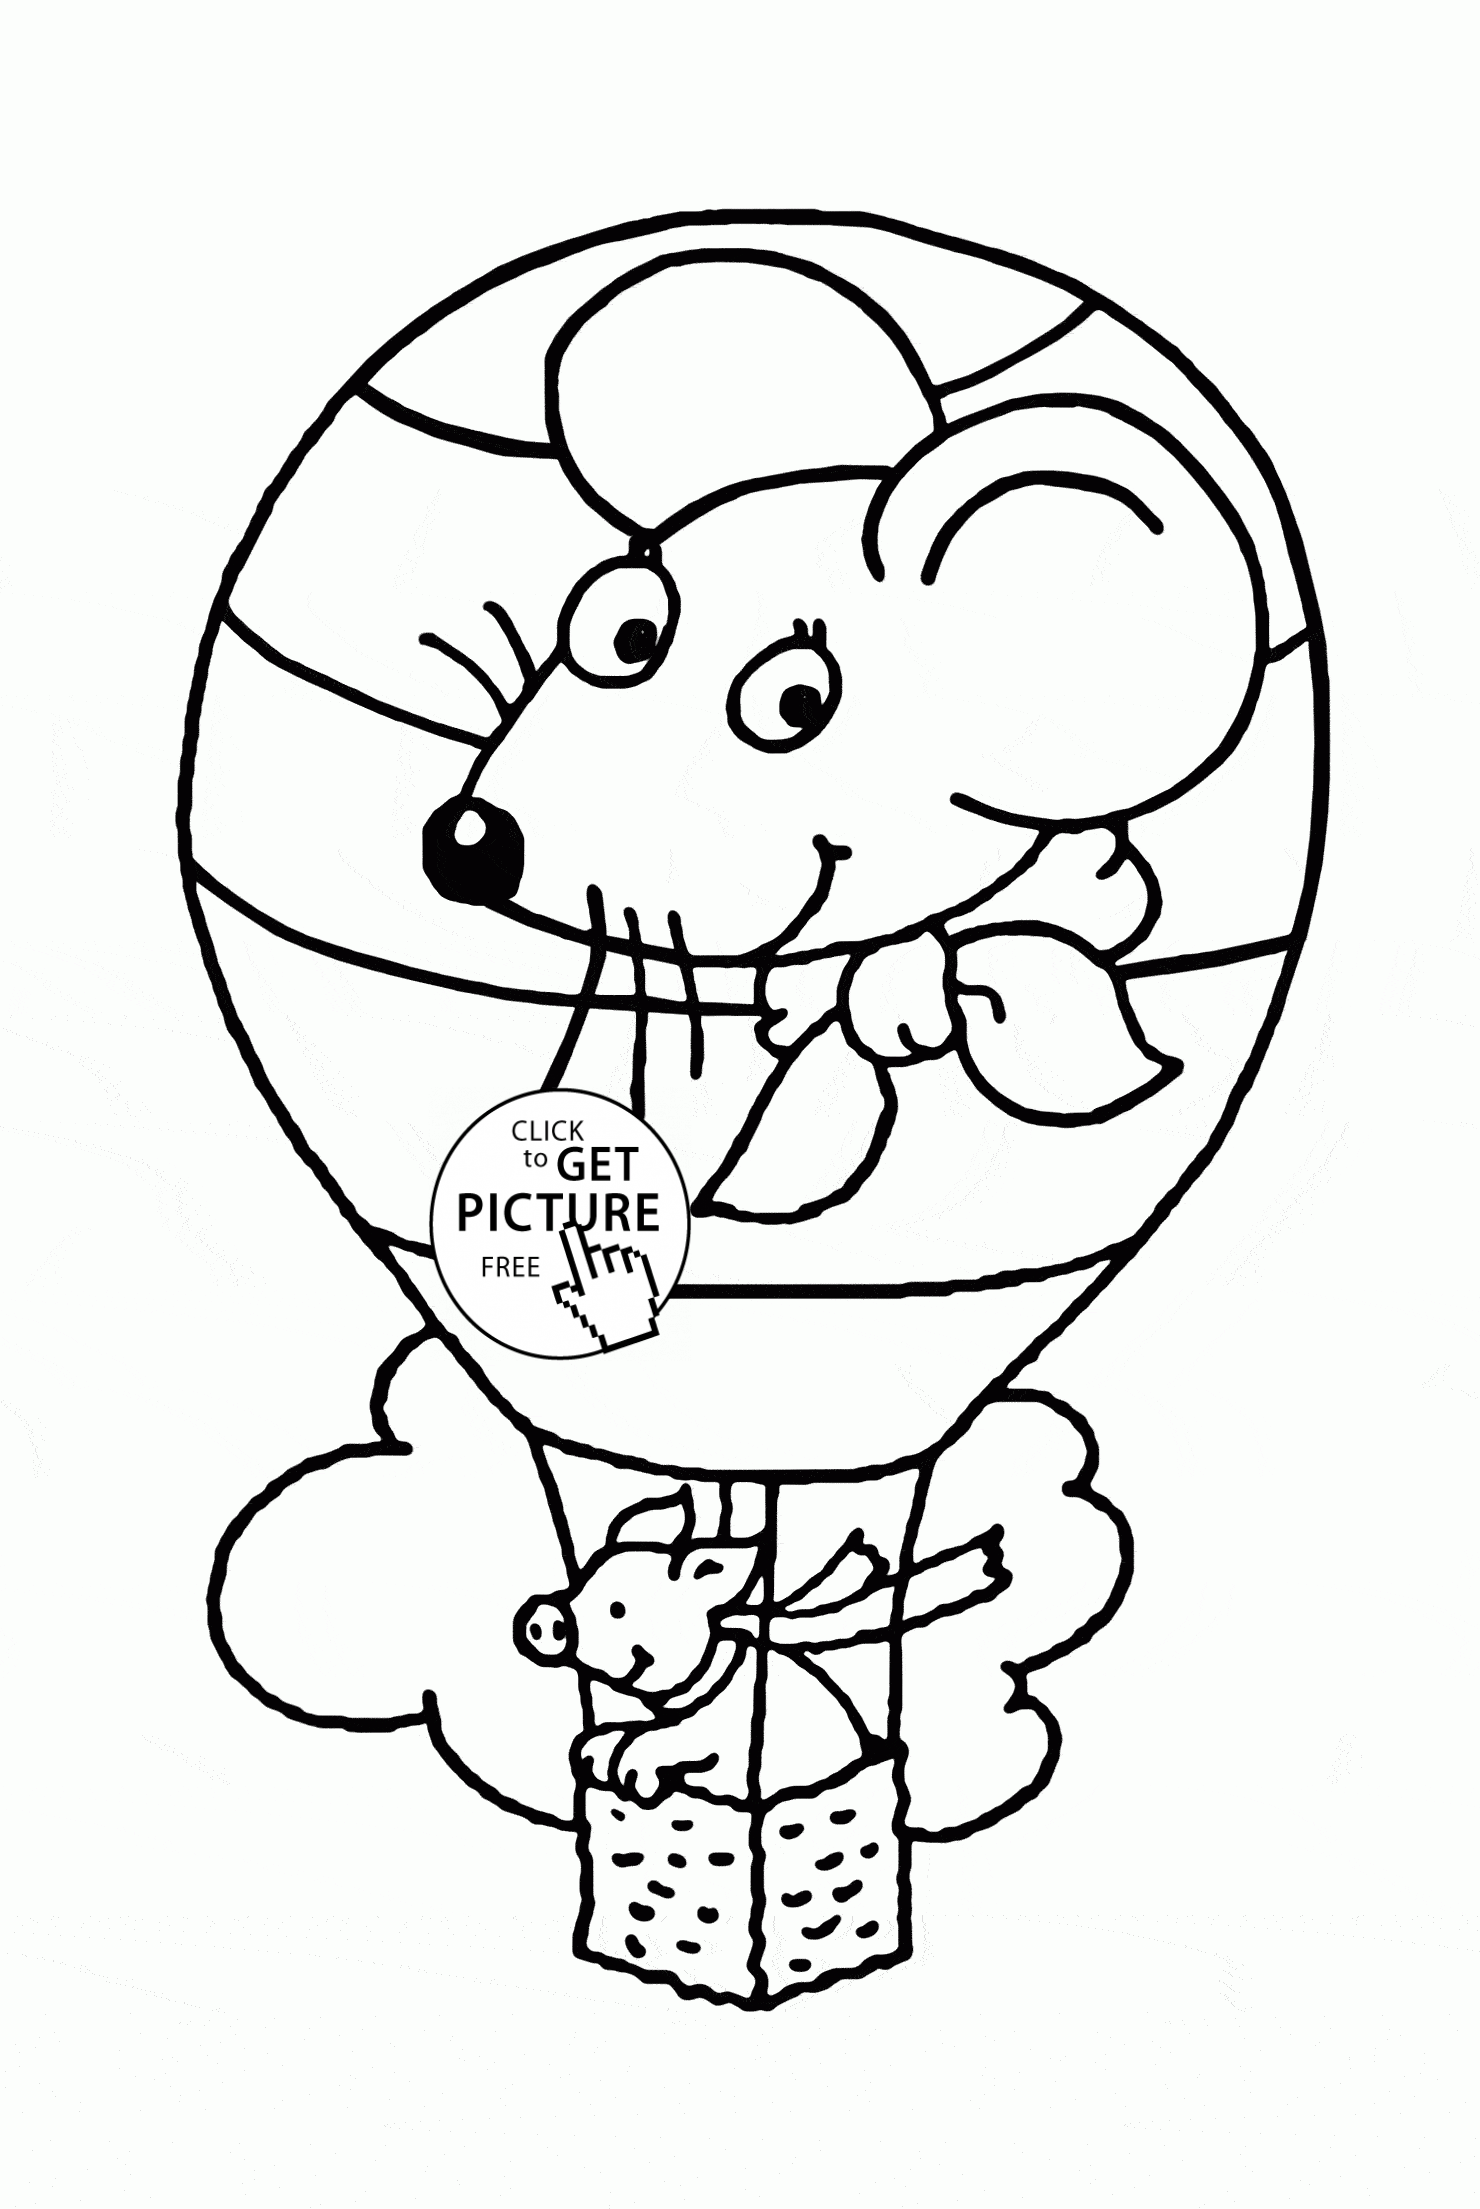 Hot Air Balloon coloring page for preschoolers, transportation ...